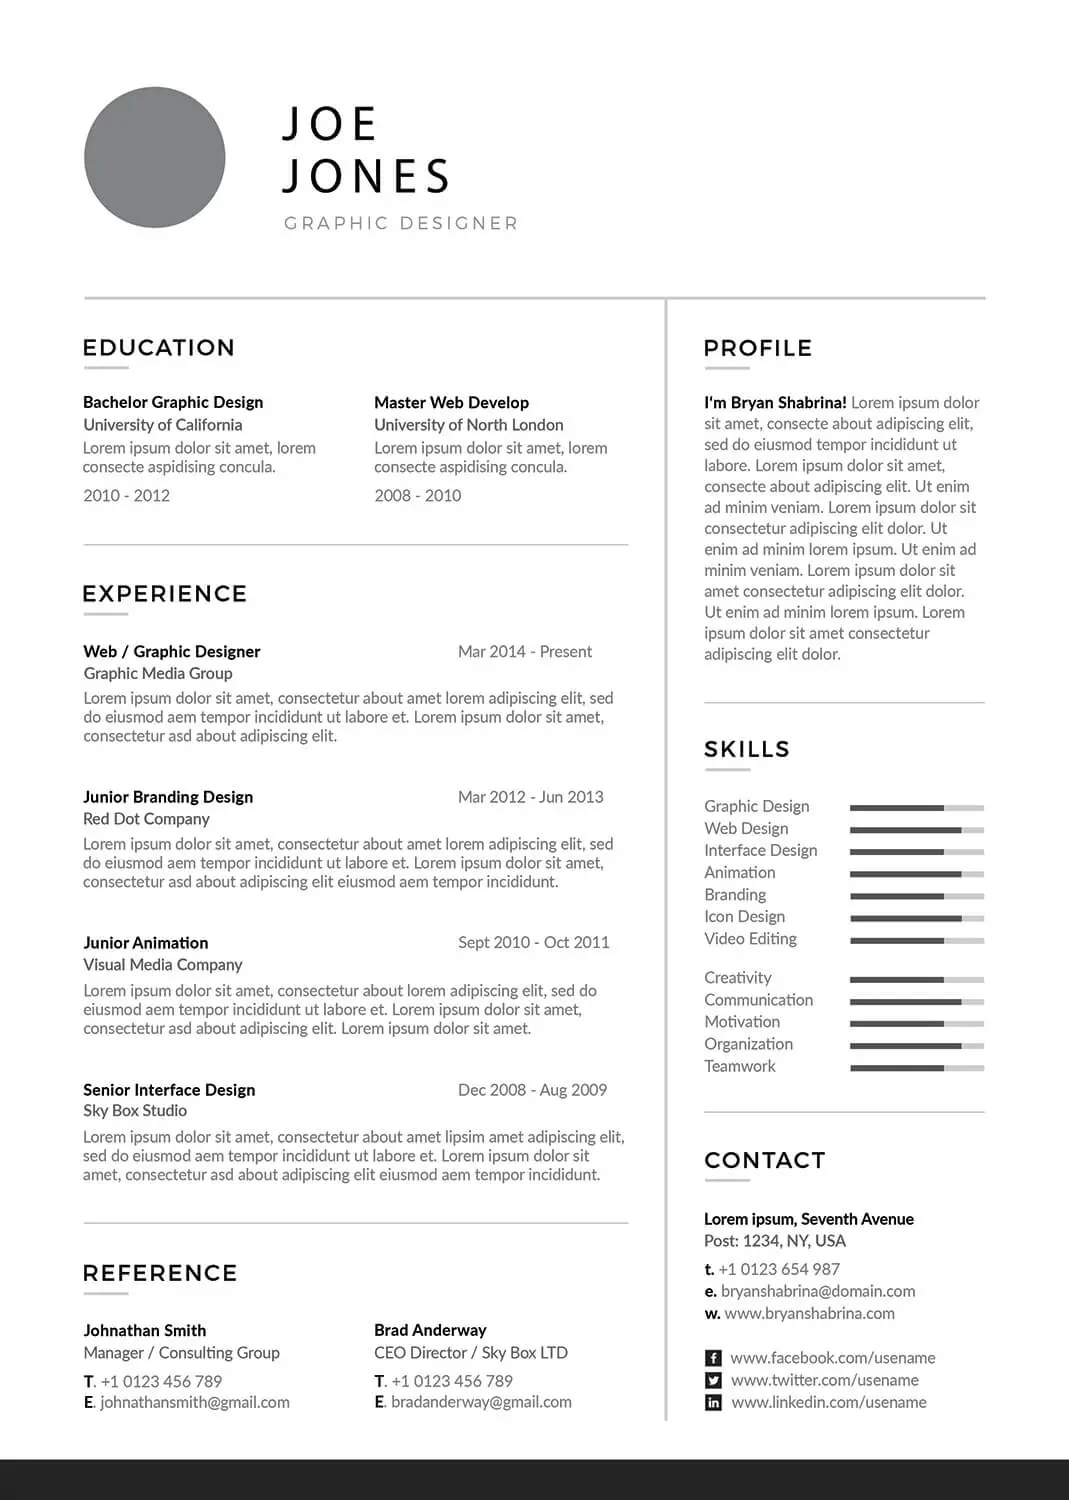 Film and Video Editor Resume Templates